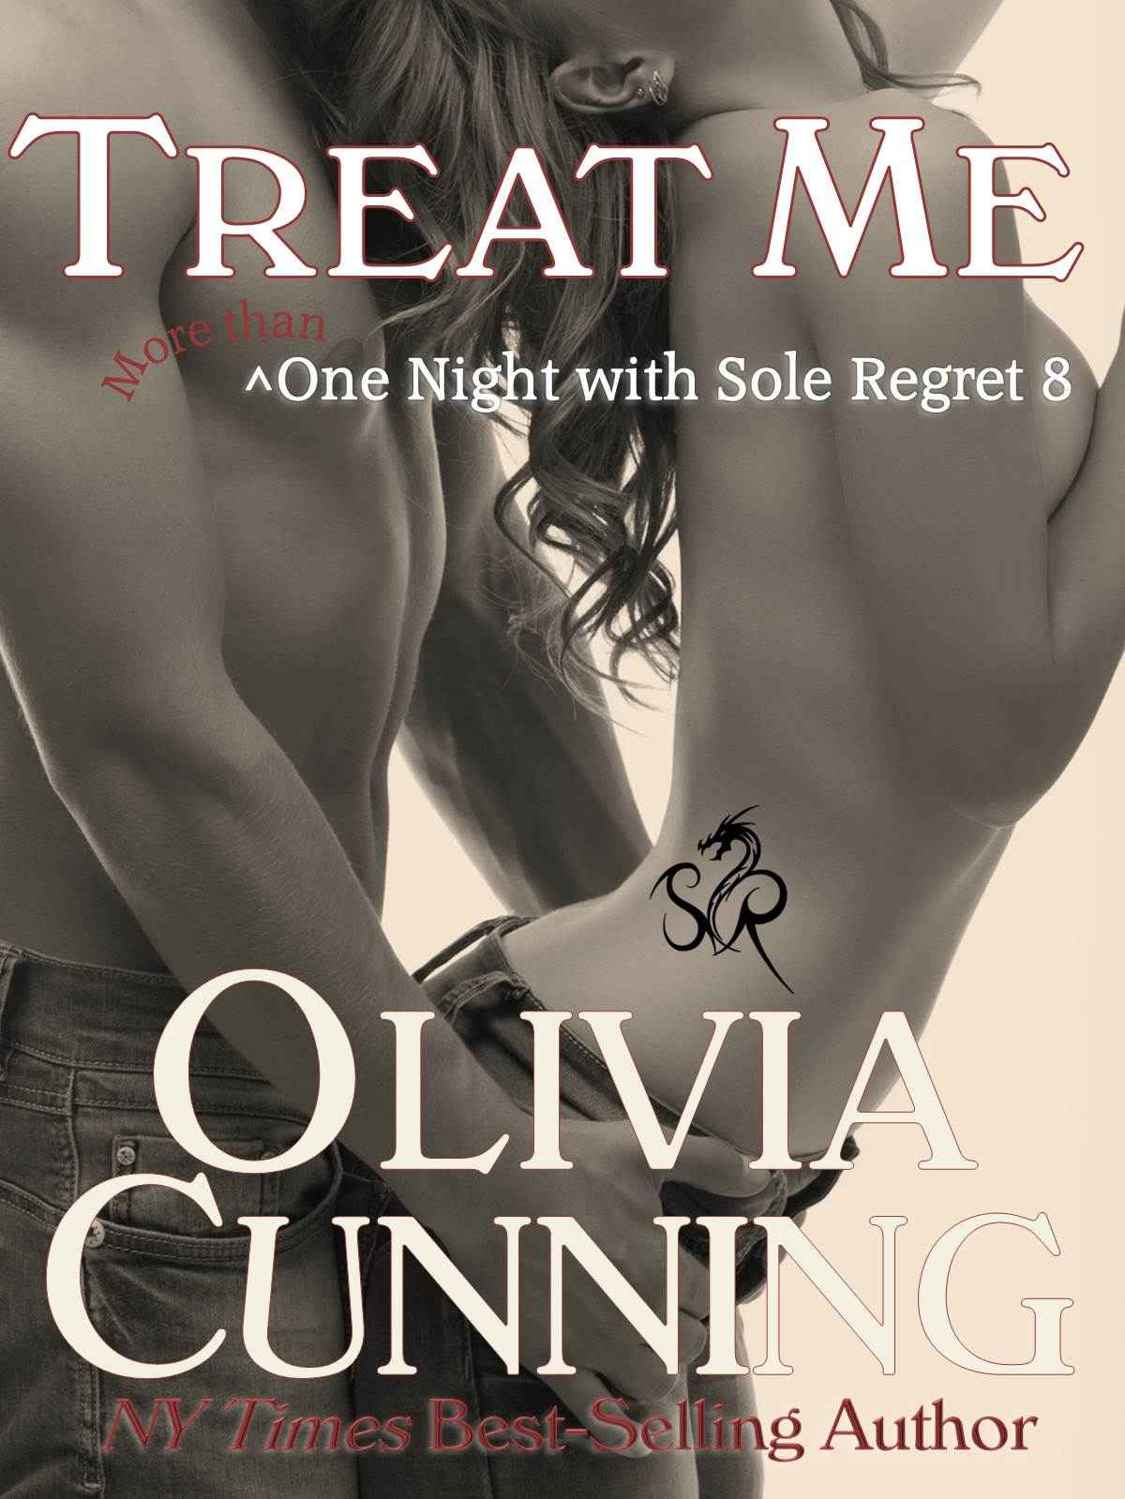 Treat Me (One Night with Sole Regret #8) by Olivia Cunning